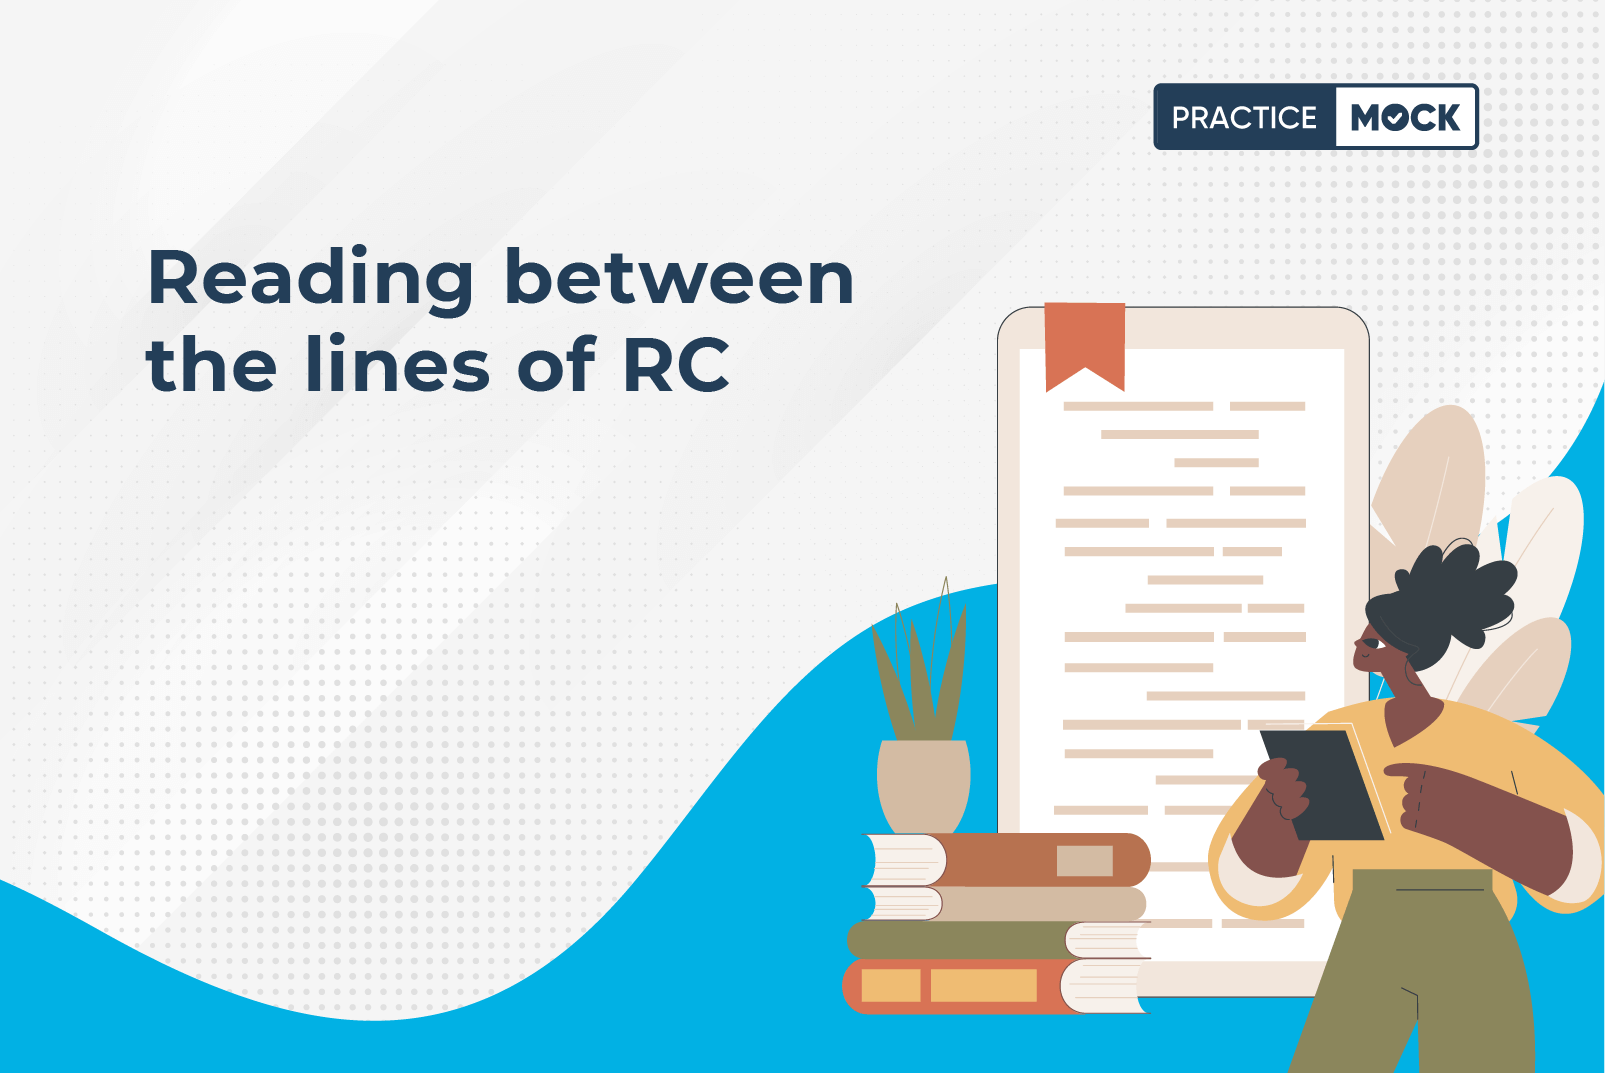 Reading between the lines of RC